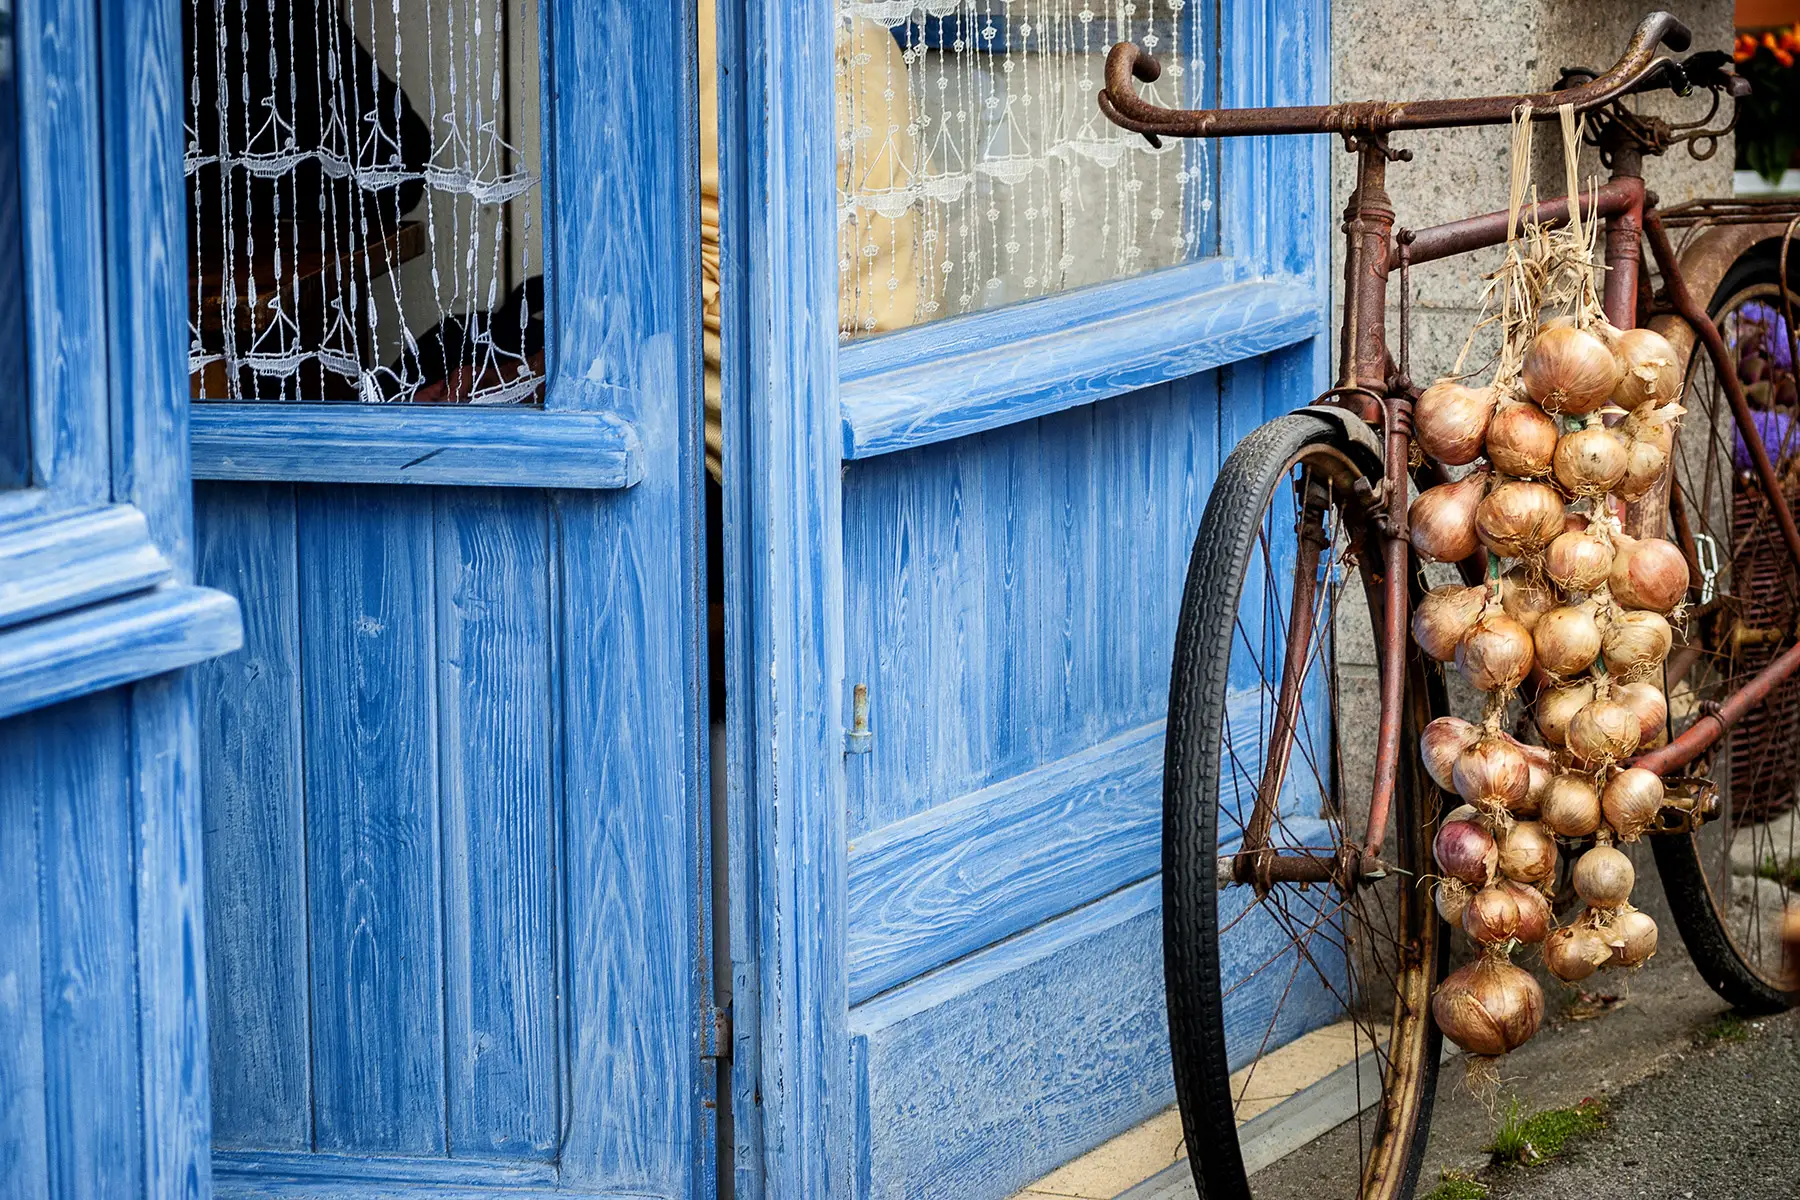 Onions hang from a bicycle outside a French home or shop